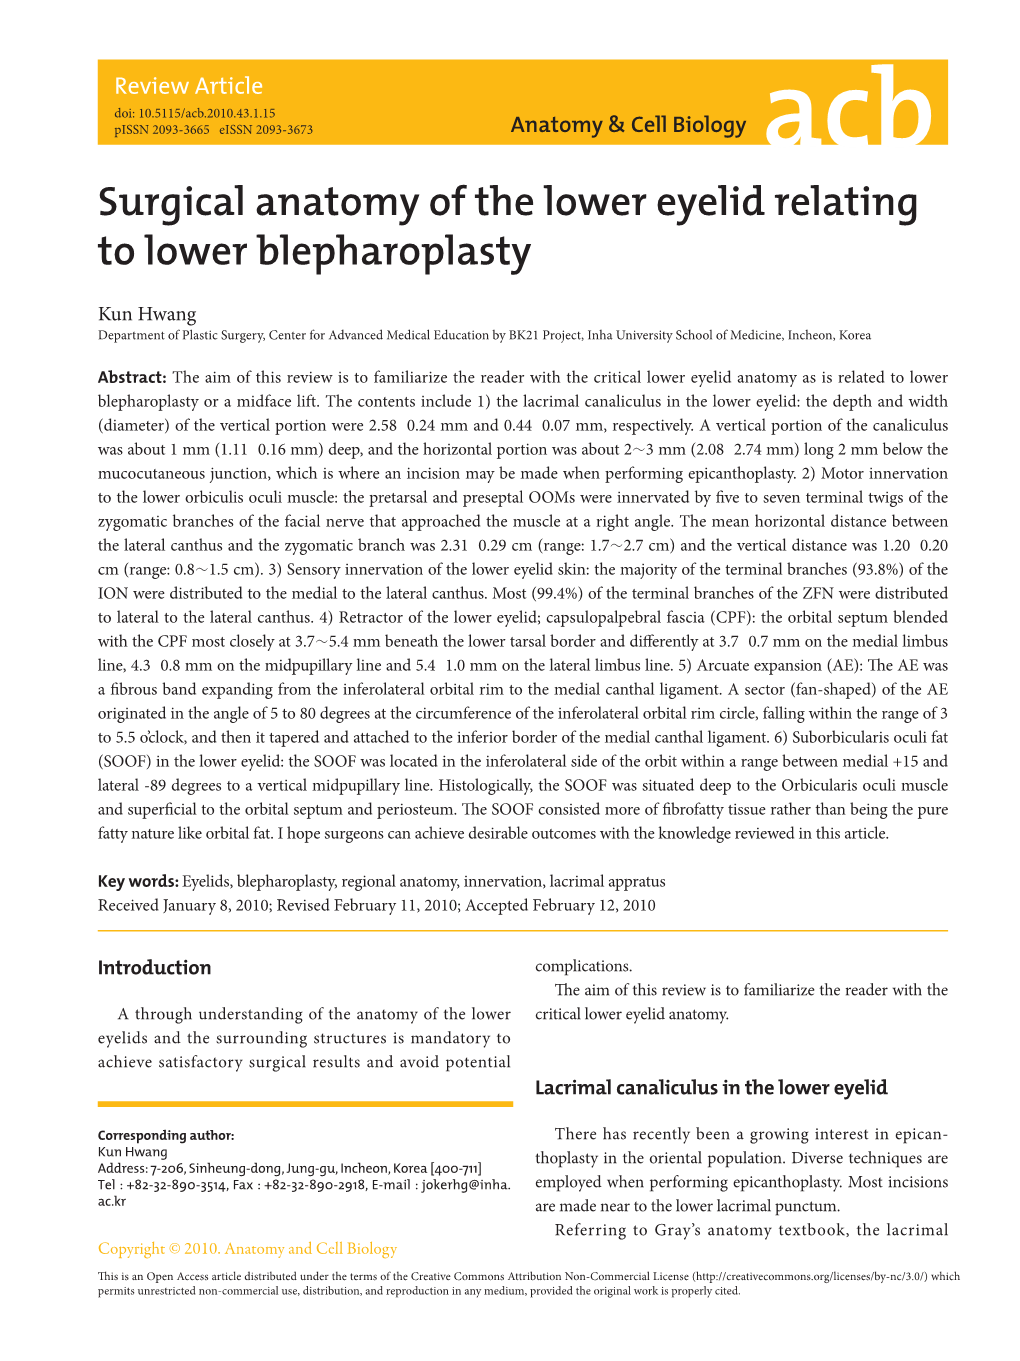 Surgical Anatomy of the Lower Eyelid Relating to Lower Blepharoplasty